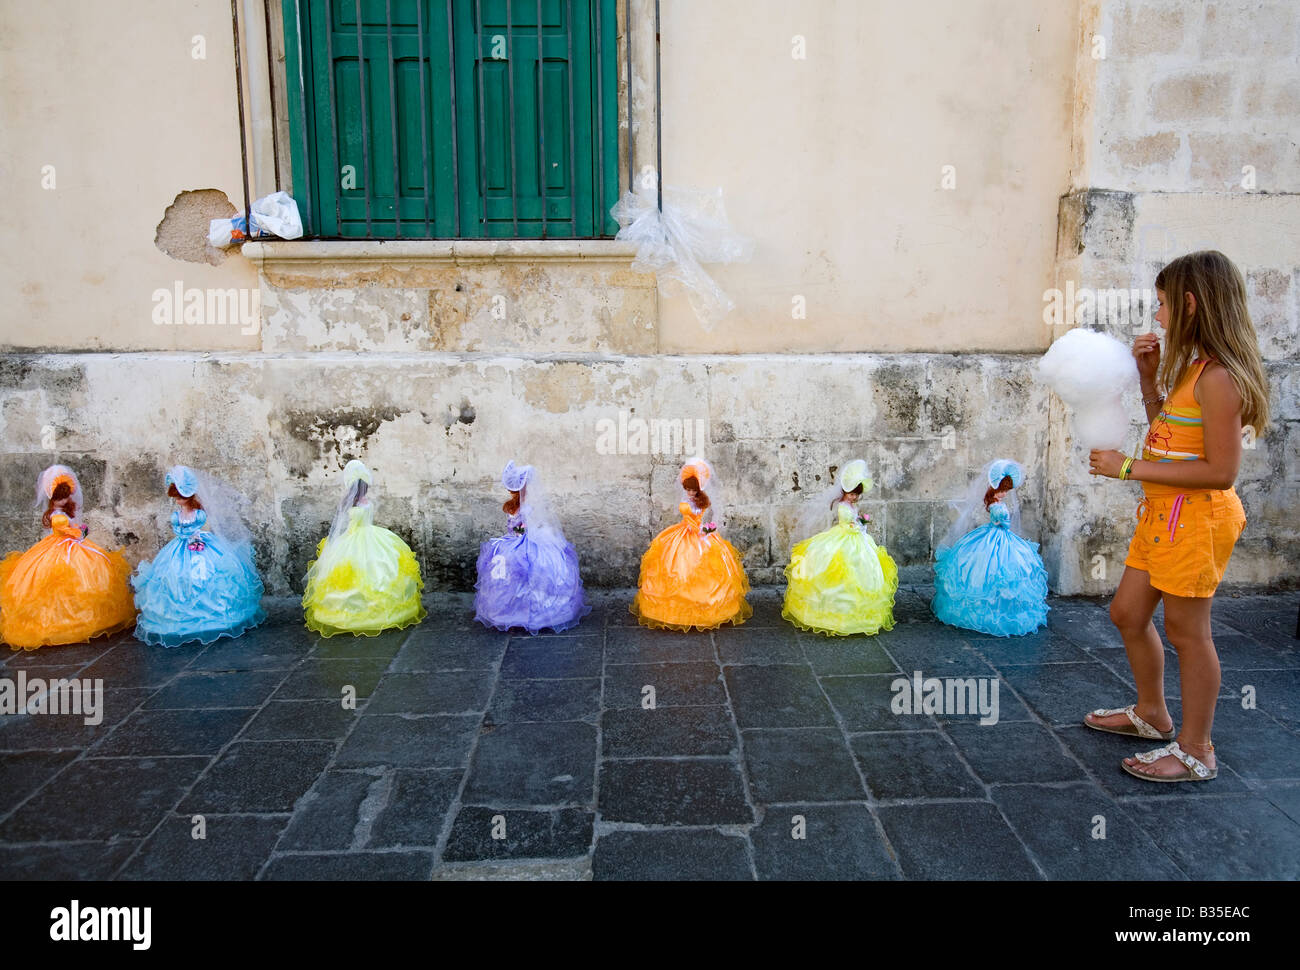 Young baby girl looking at typical local dolls for sale in the street of Noto Sicily Italy Stock Photo